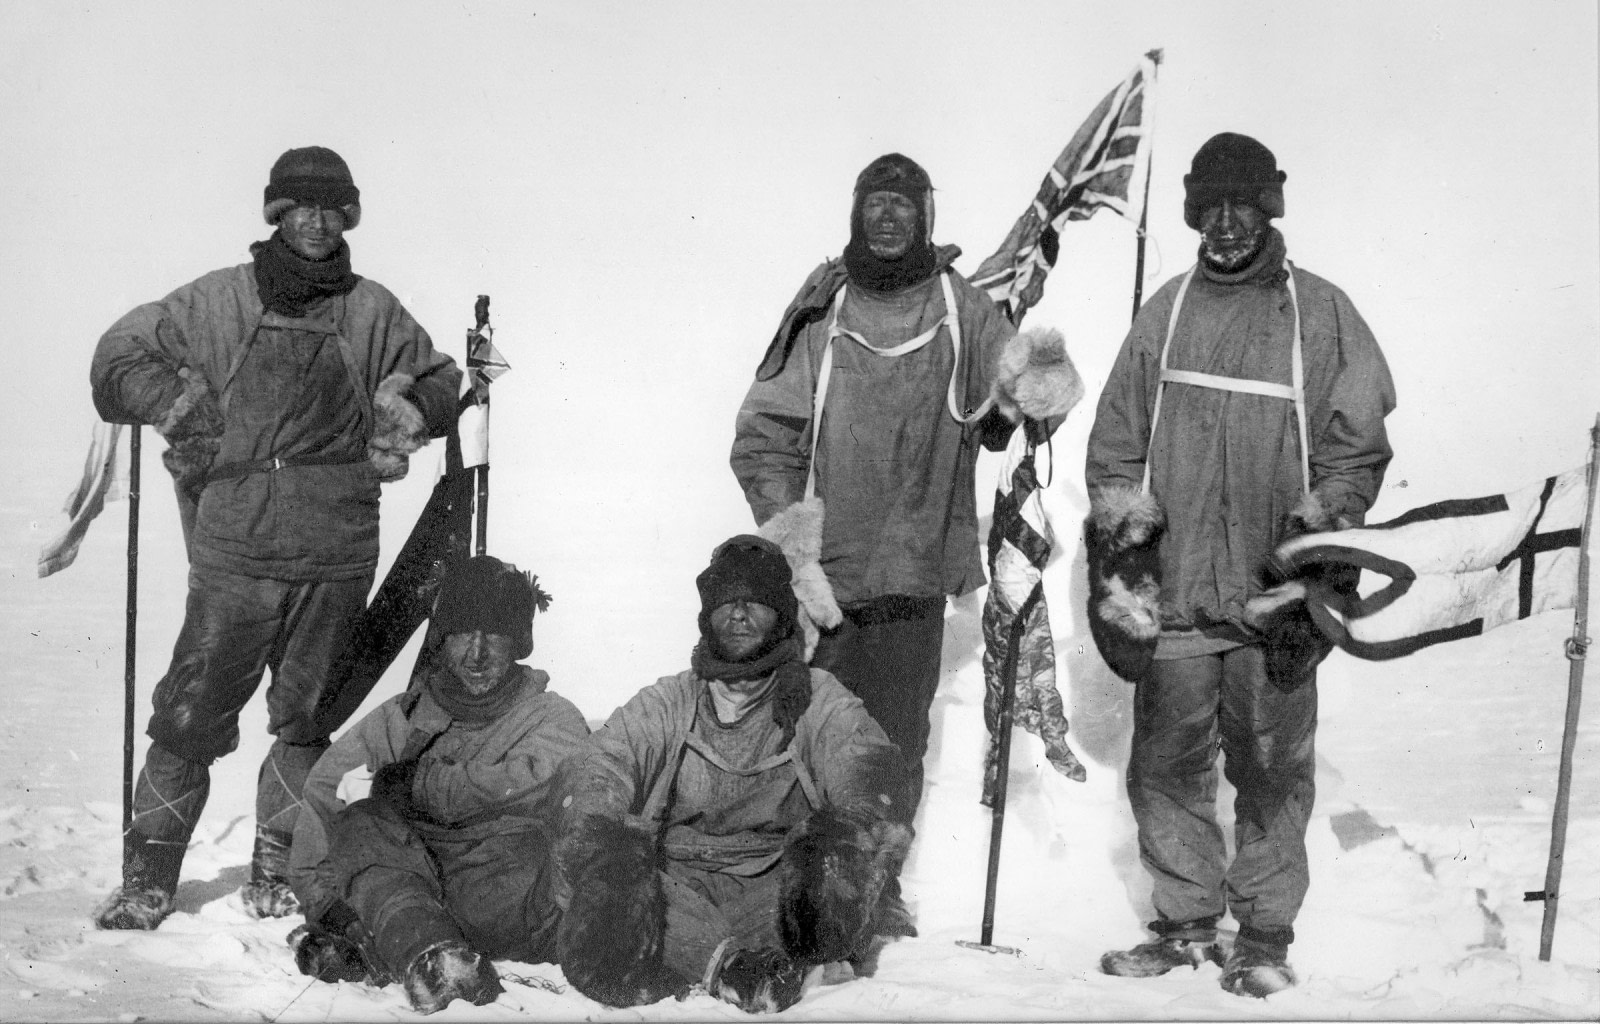 Polar Gear of Yesteryear: Expedition Clothing 100 Years Ago